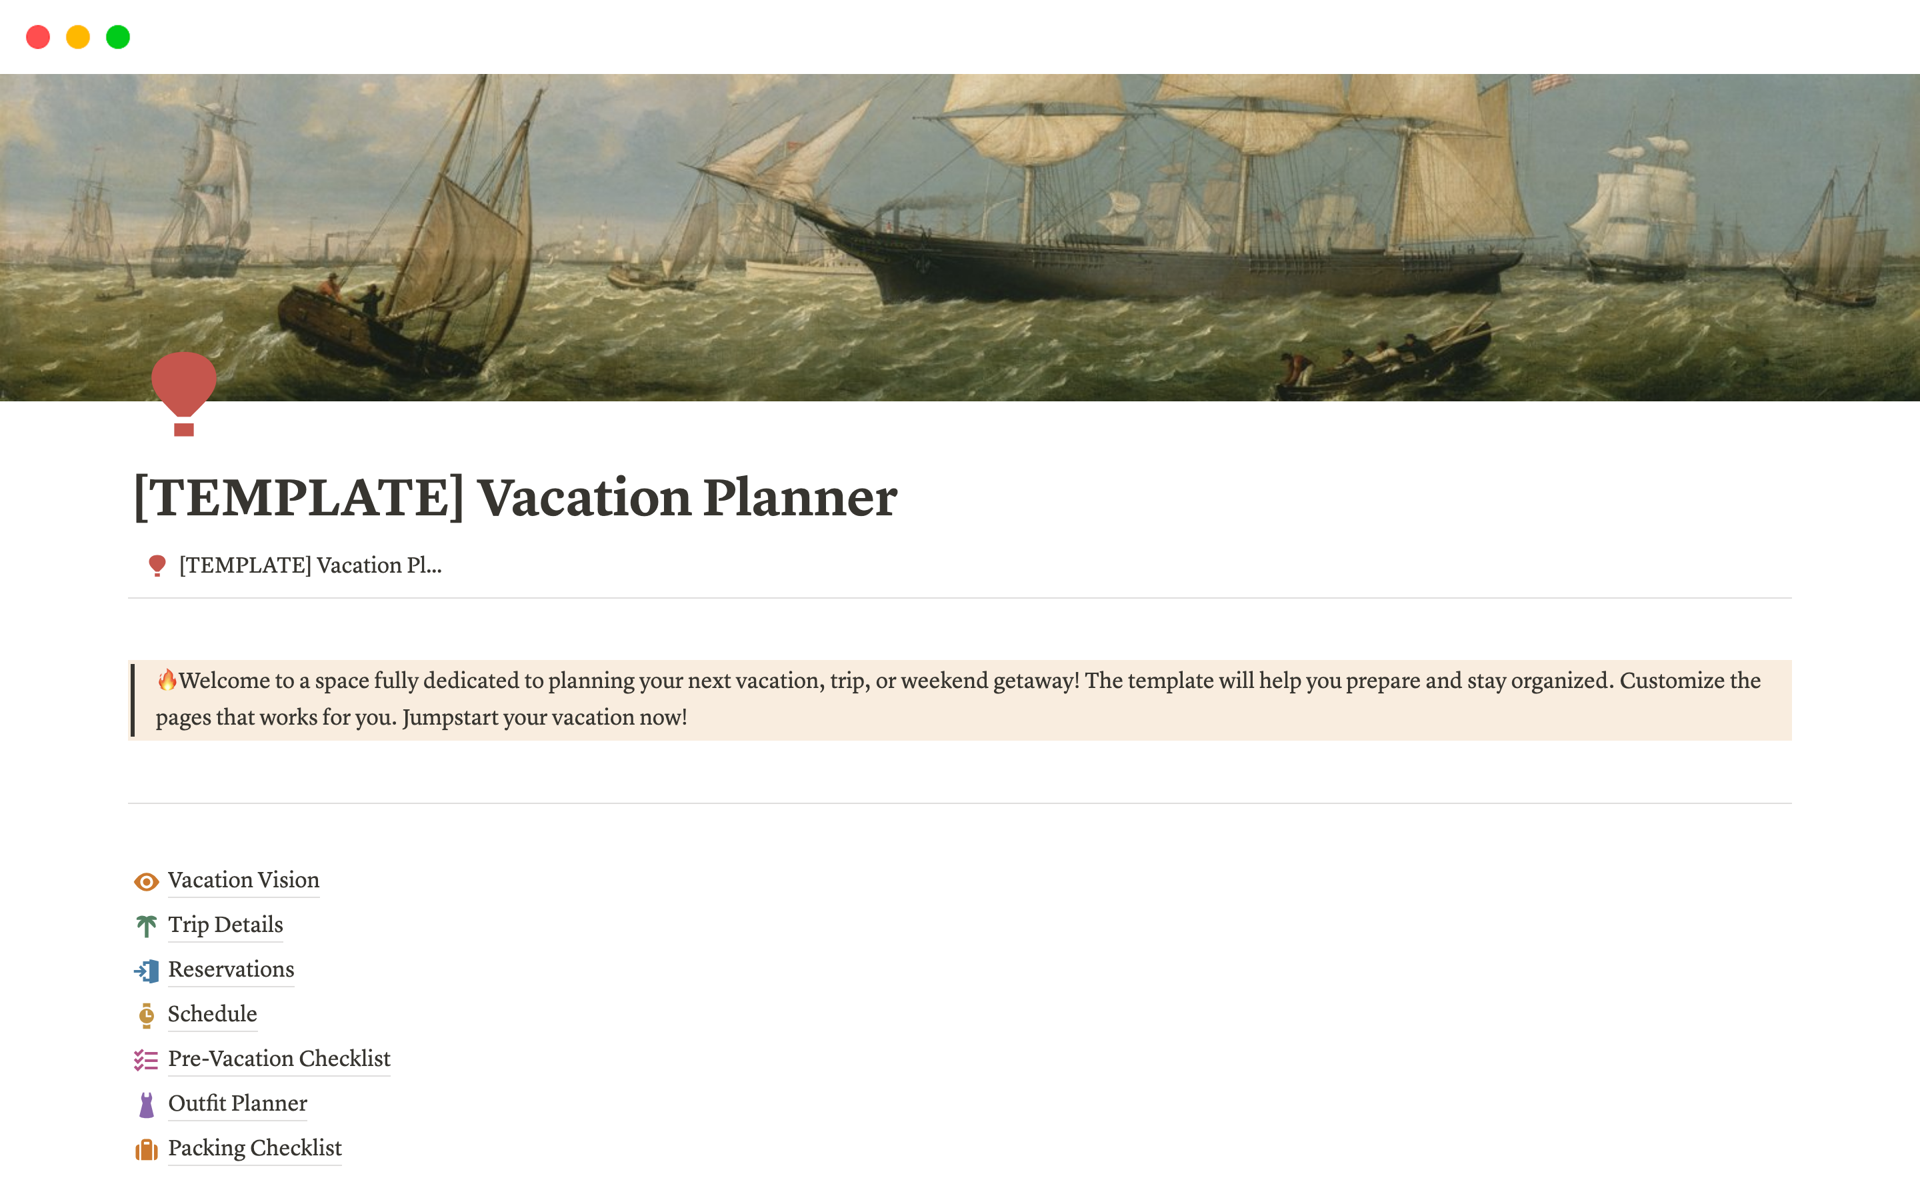 Vacation Planner - from trip idea, planning, and booking to packing - this template is your all-in-one vacation hub.